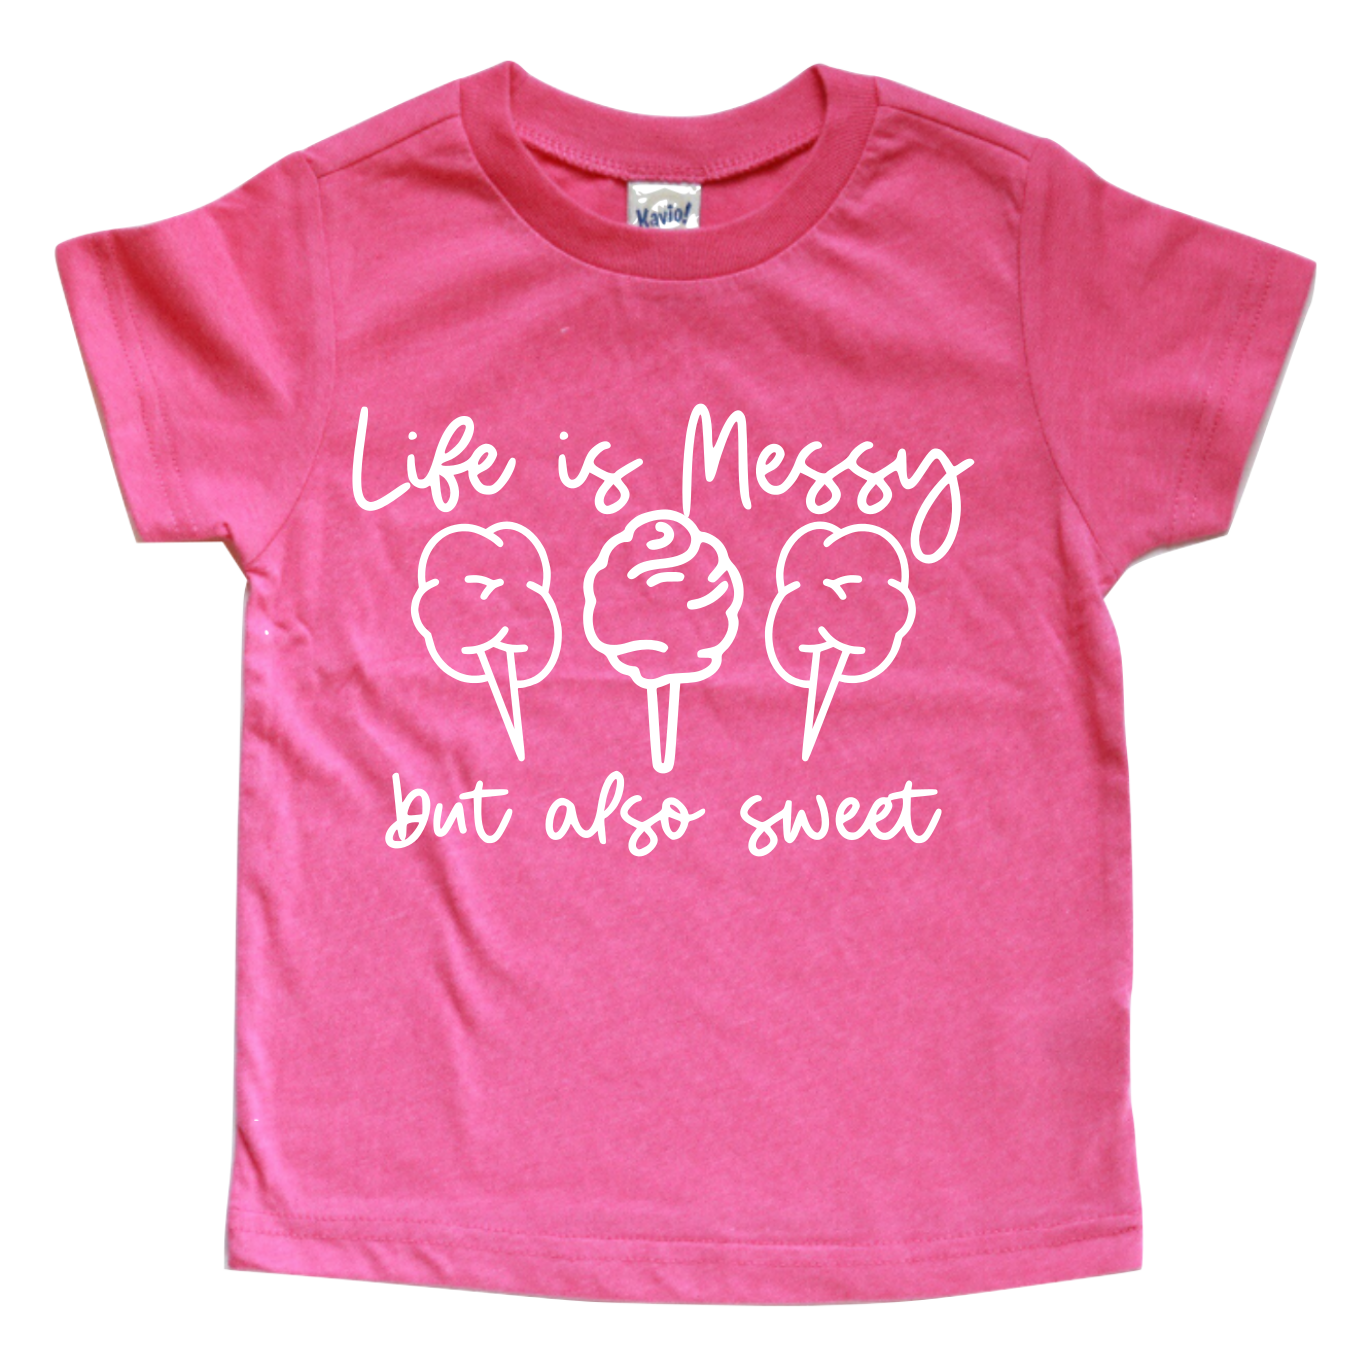 LIFE IS MESSY BUT ALSO SWEET KIDS SHIRT